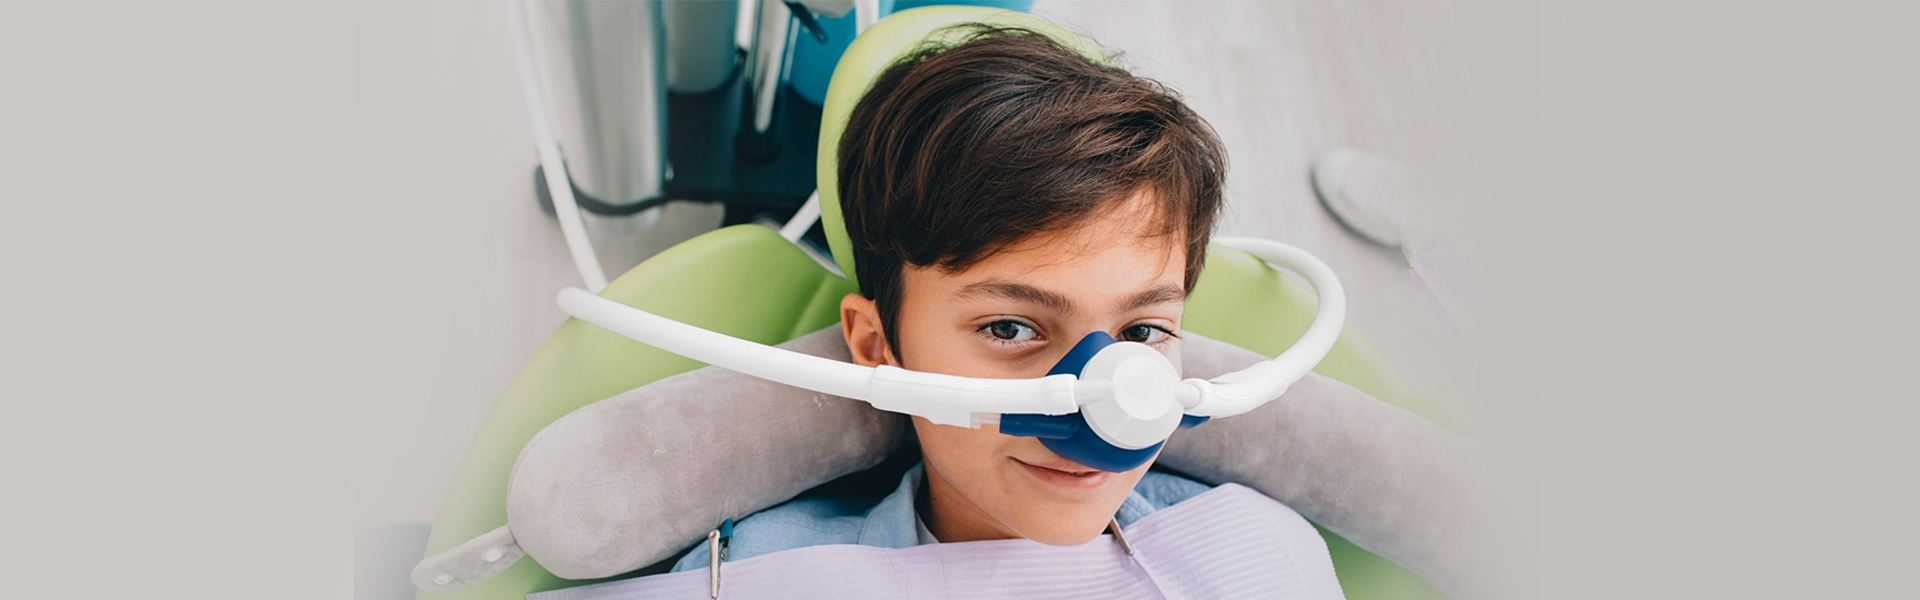 Laughing Gas for Dental Procedures: How Does it Help